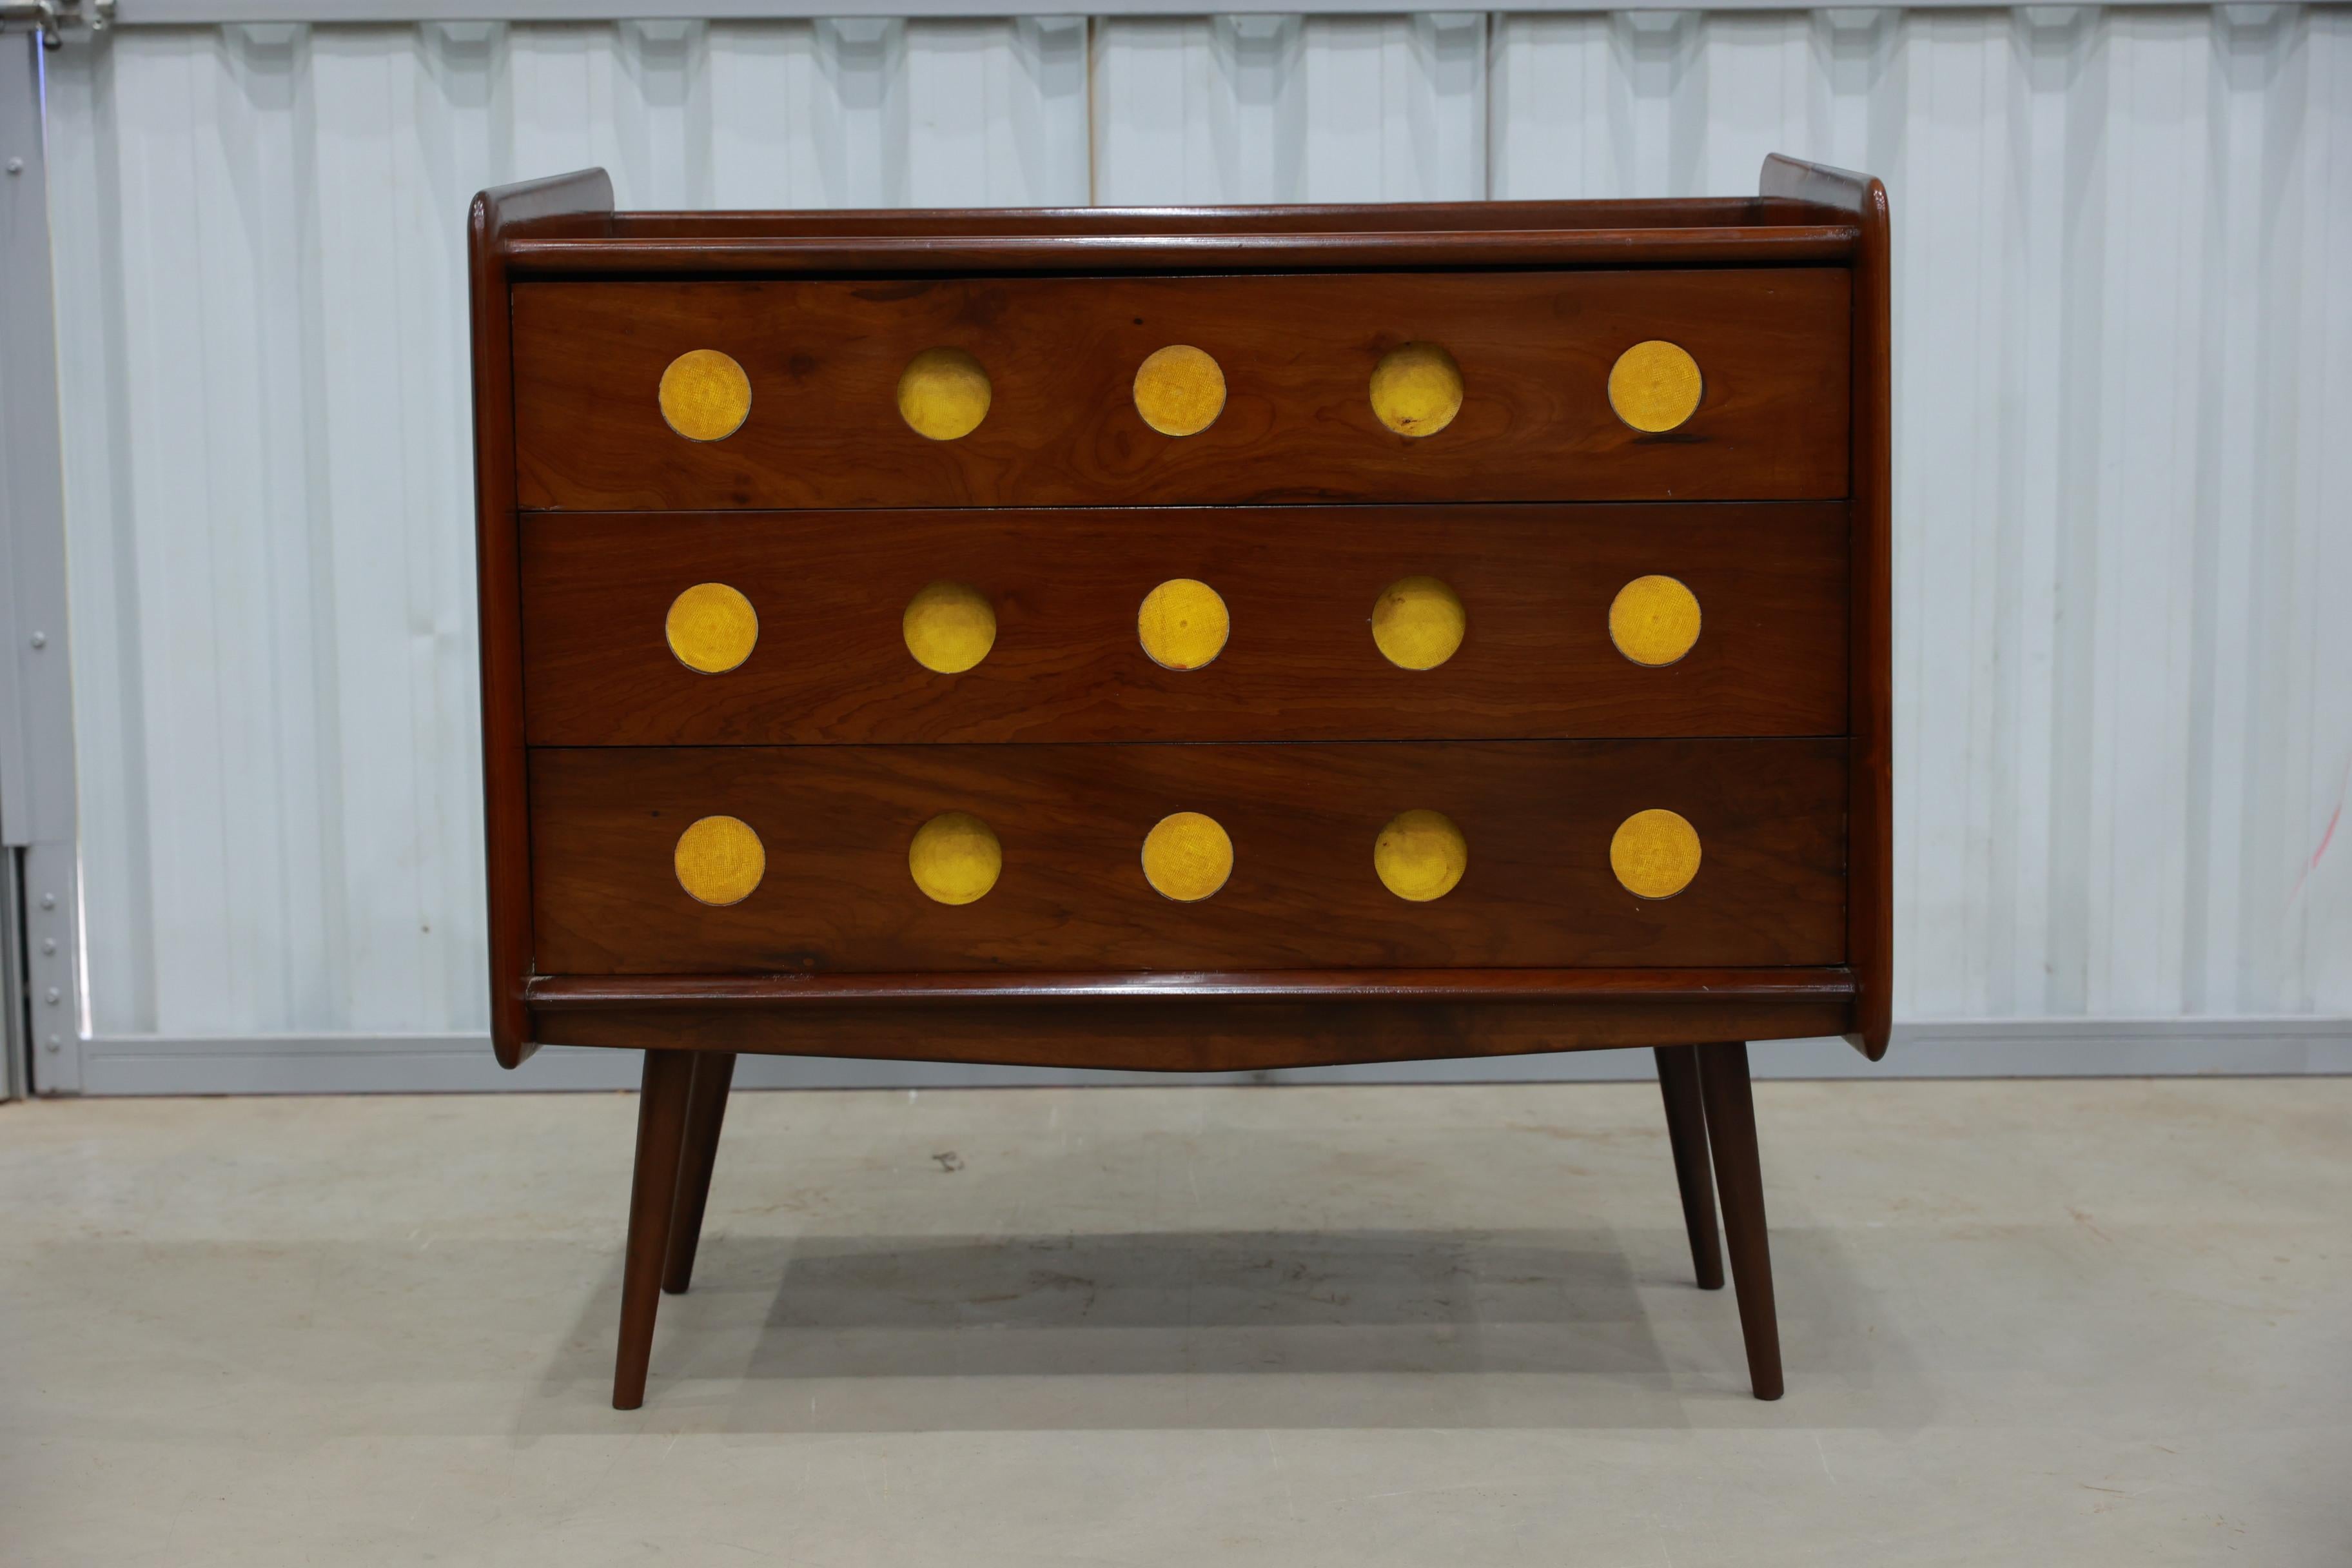 Available today, this Mid-Century Modern chest of drawers made in hardwood and yellow formica designed by Moveis Cimo in the fifties is a very rare FIND and is gorgeous!

The chest is entirely made in Imbuia hardwood and features a rectangular